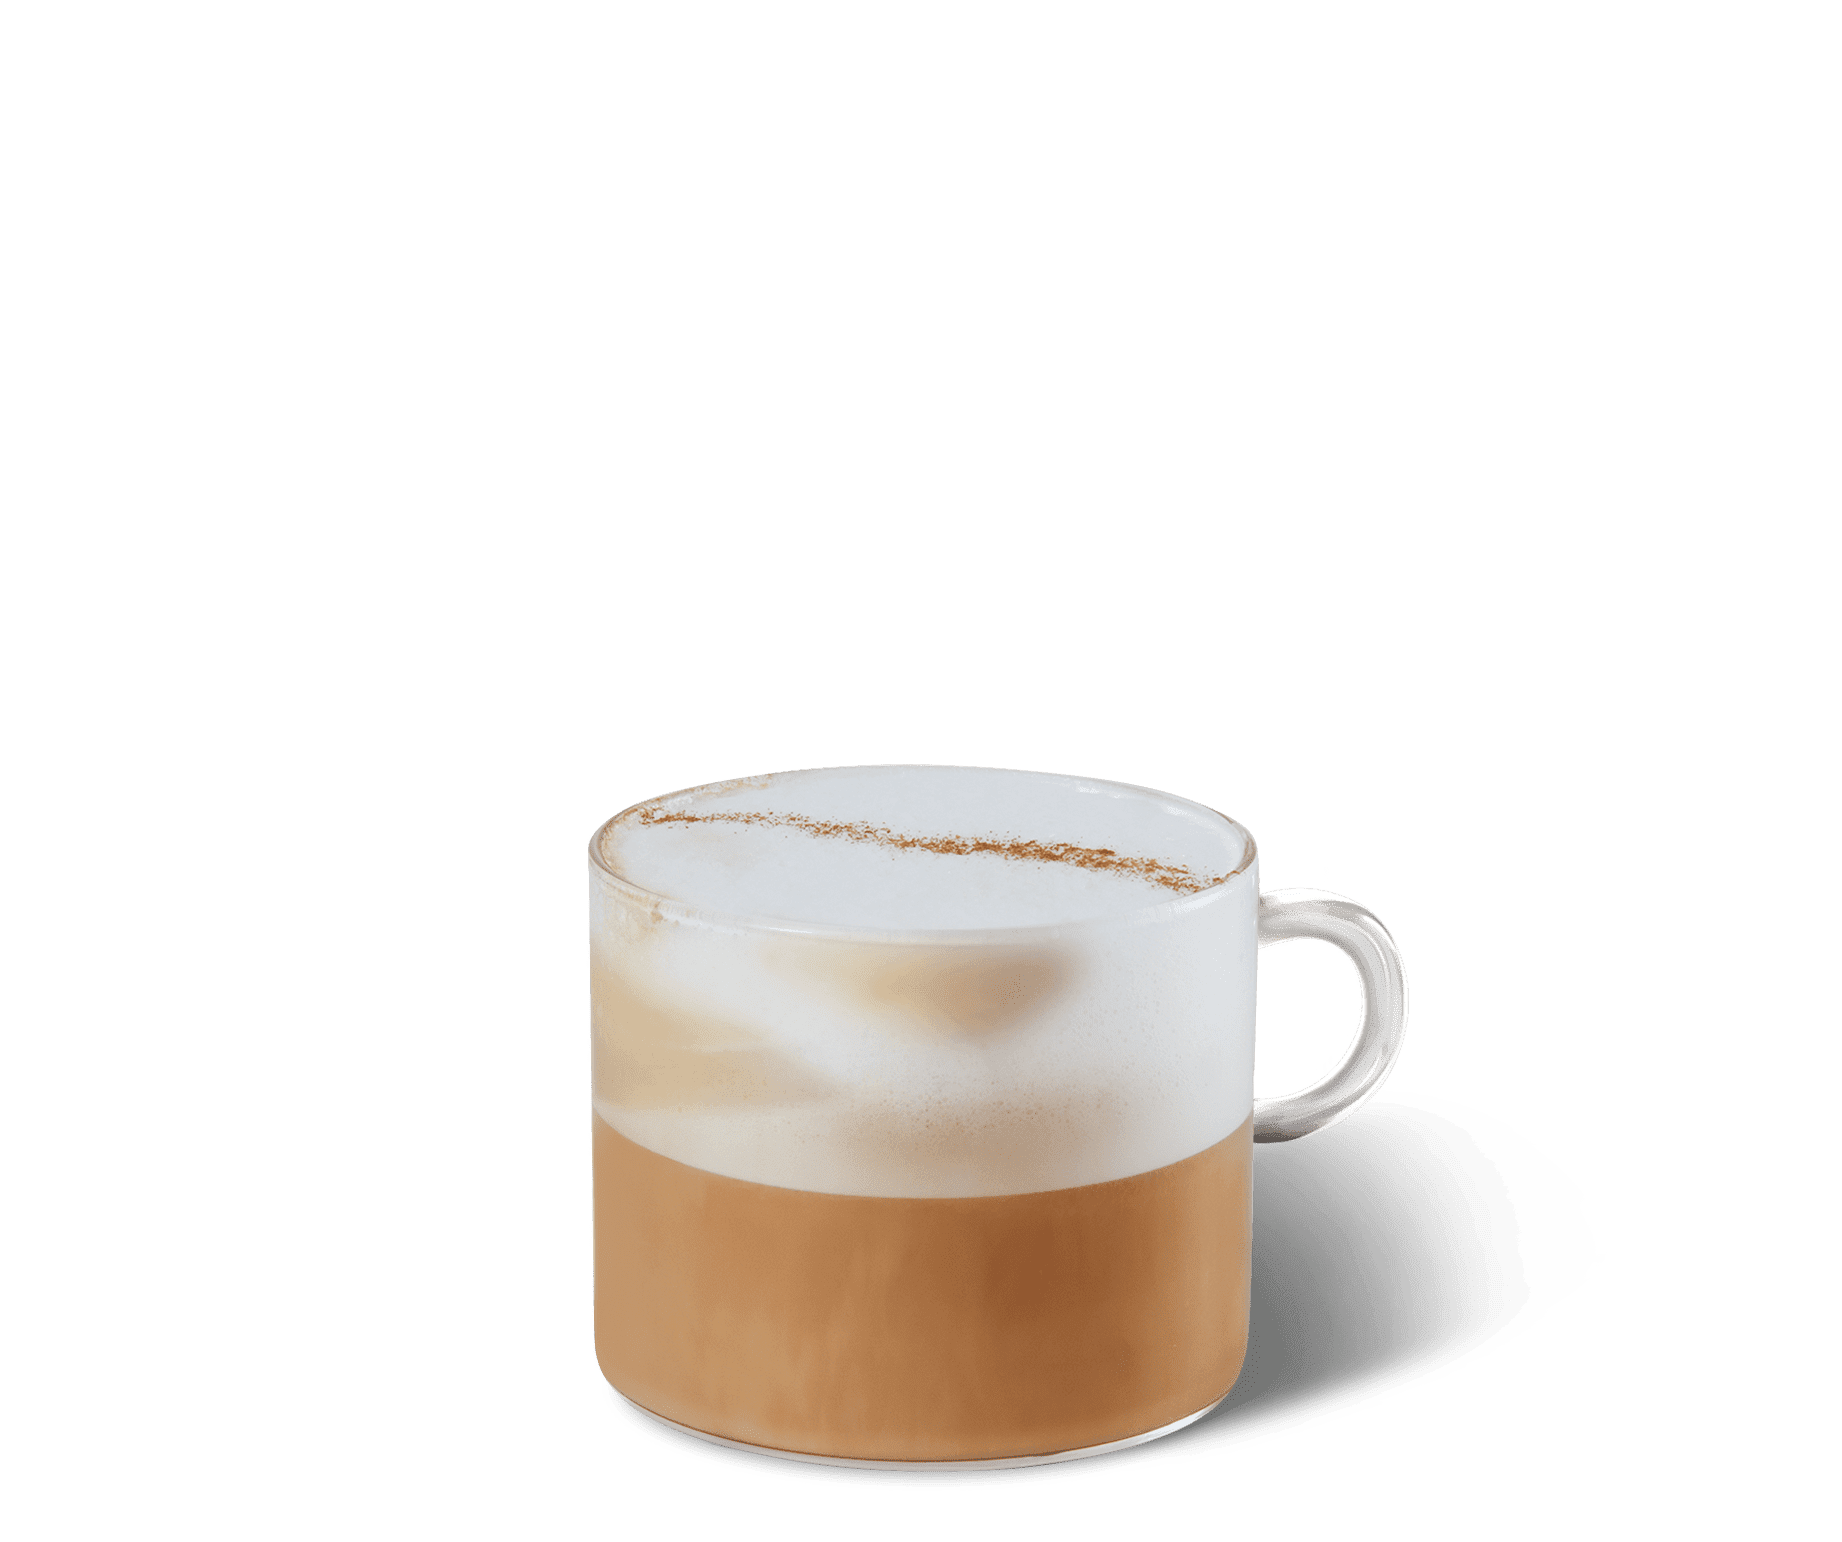 jordnødder talentfulde Soaked How to make cappuccino| Starbucks® Coffee at Home